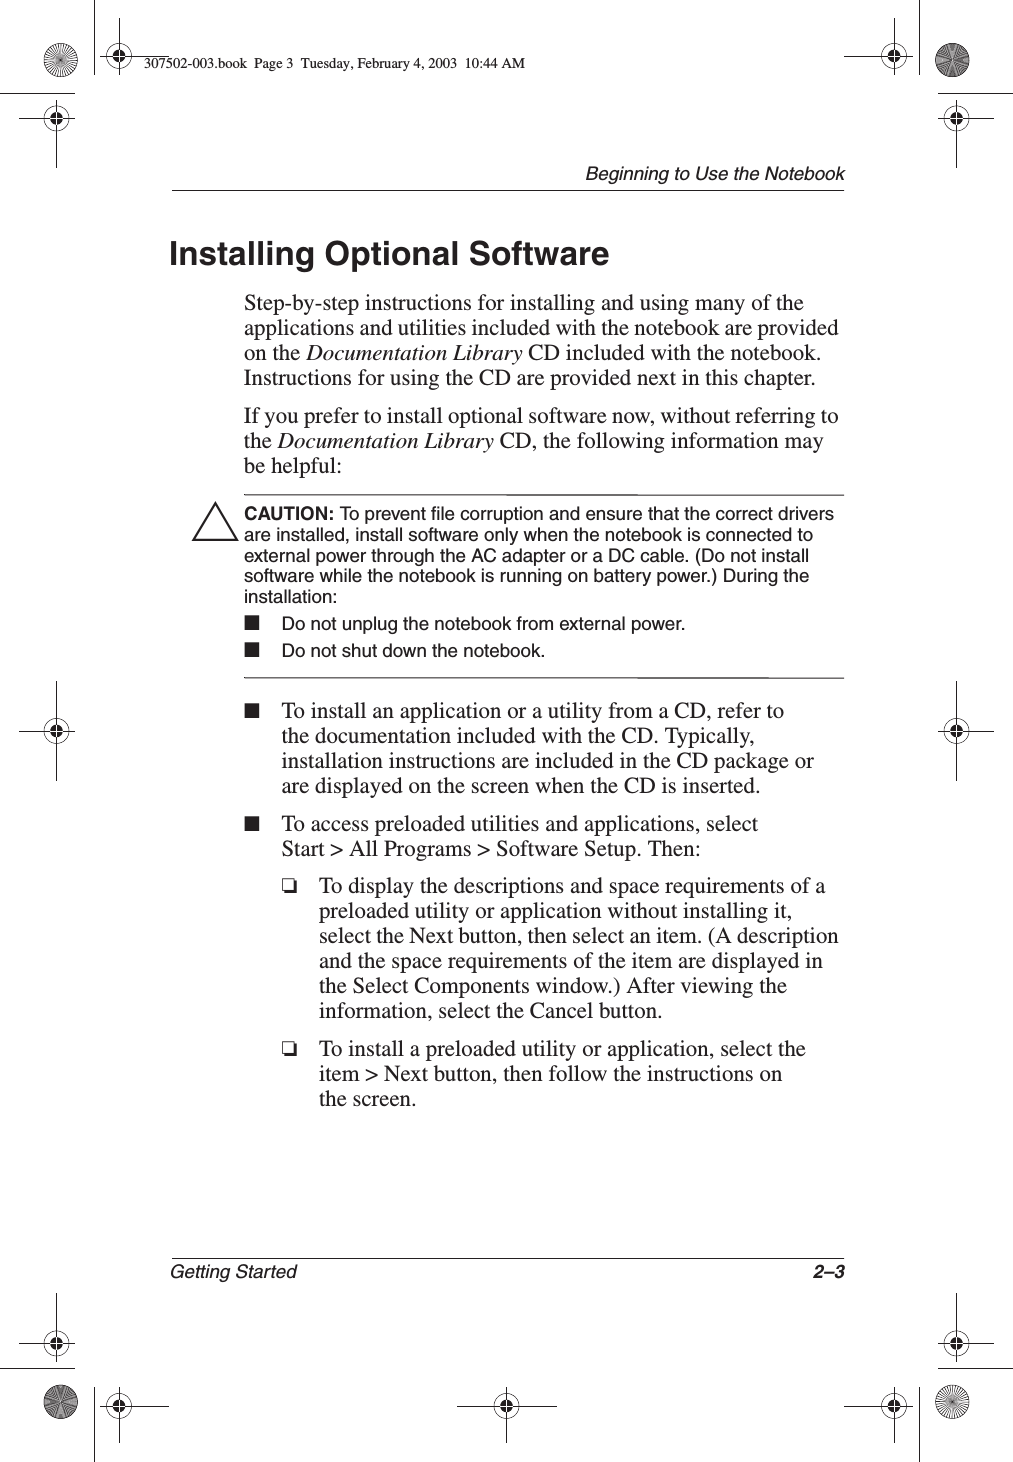 Beginning to Use the NotebookGetting Started 2–3Installing Optional SoftwareStep-by-step instructions for installing and using many of the applications and utilities included with the notebook are provided on the Documentation Library CD included with the notebook. Instructions for using the CD are provided next in this chapter.If you prefer to install optional software now, without referring to the Documentation Library CD, the following information may be helpful:ÄCAUTION: To prevent file corruption and ensure that the correct drivers are installed, install software only when the notebook is connected to external power through the AC adapter or a DC cable. (Do not install software while the notebook is running on battery power.) During the installation:■Do not unplug the notebook from external power.■Do not shut down the notebook.■To install an application or a utility from a CD, refer to the documentation included with the CD. Typically, installation instructions are included in the CD package or are displayed on the screen when the CD is inserted.■To access preloaded utilities and applications, select Start &gt; All Programs &gt; Software Setup. Then:❏To display the descriptions and space requirements of a preloaded utility or application without installing it, select the Next button, then select an item. (A description and the space requirements of the item are displayed in the Select Components window.) After viewing the information, select the Cancel button.❏To install a preloaded utility or application, select the item &gt; Next button, then follow the instructions on the screen.307502-003.book  Page 3  Tuesday, February 4, 2003  10:44 AM